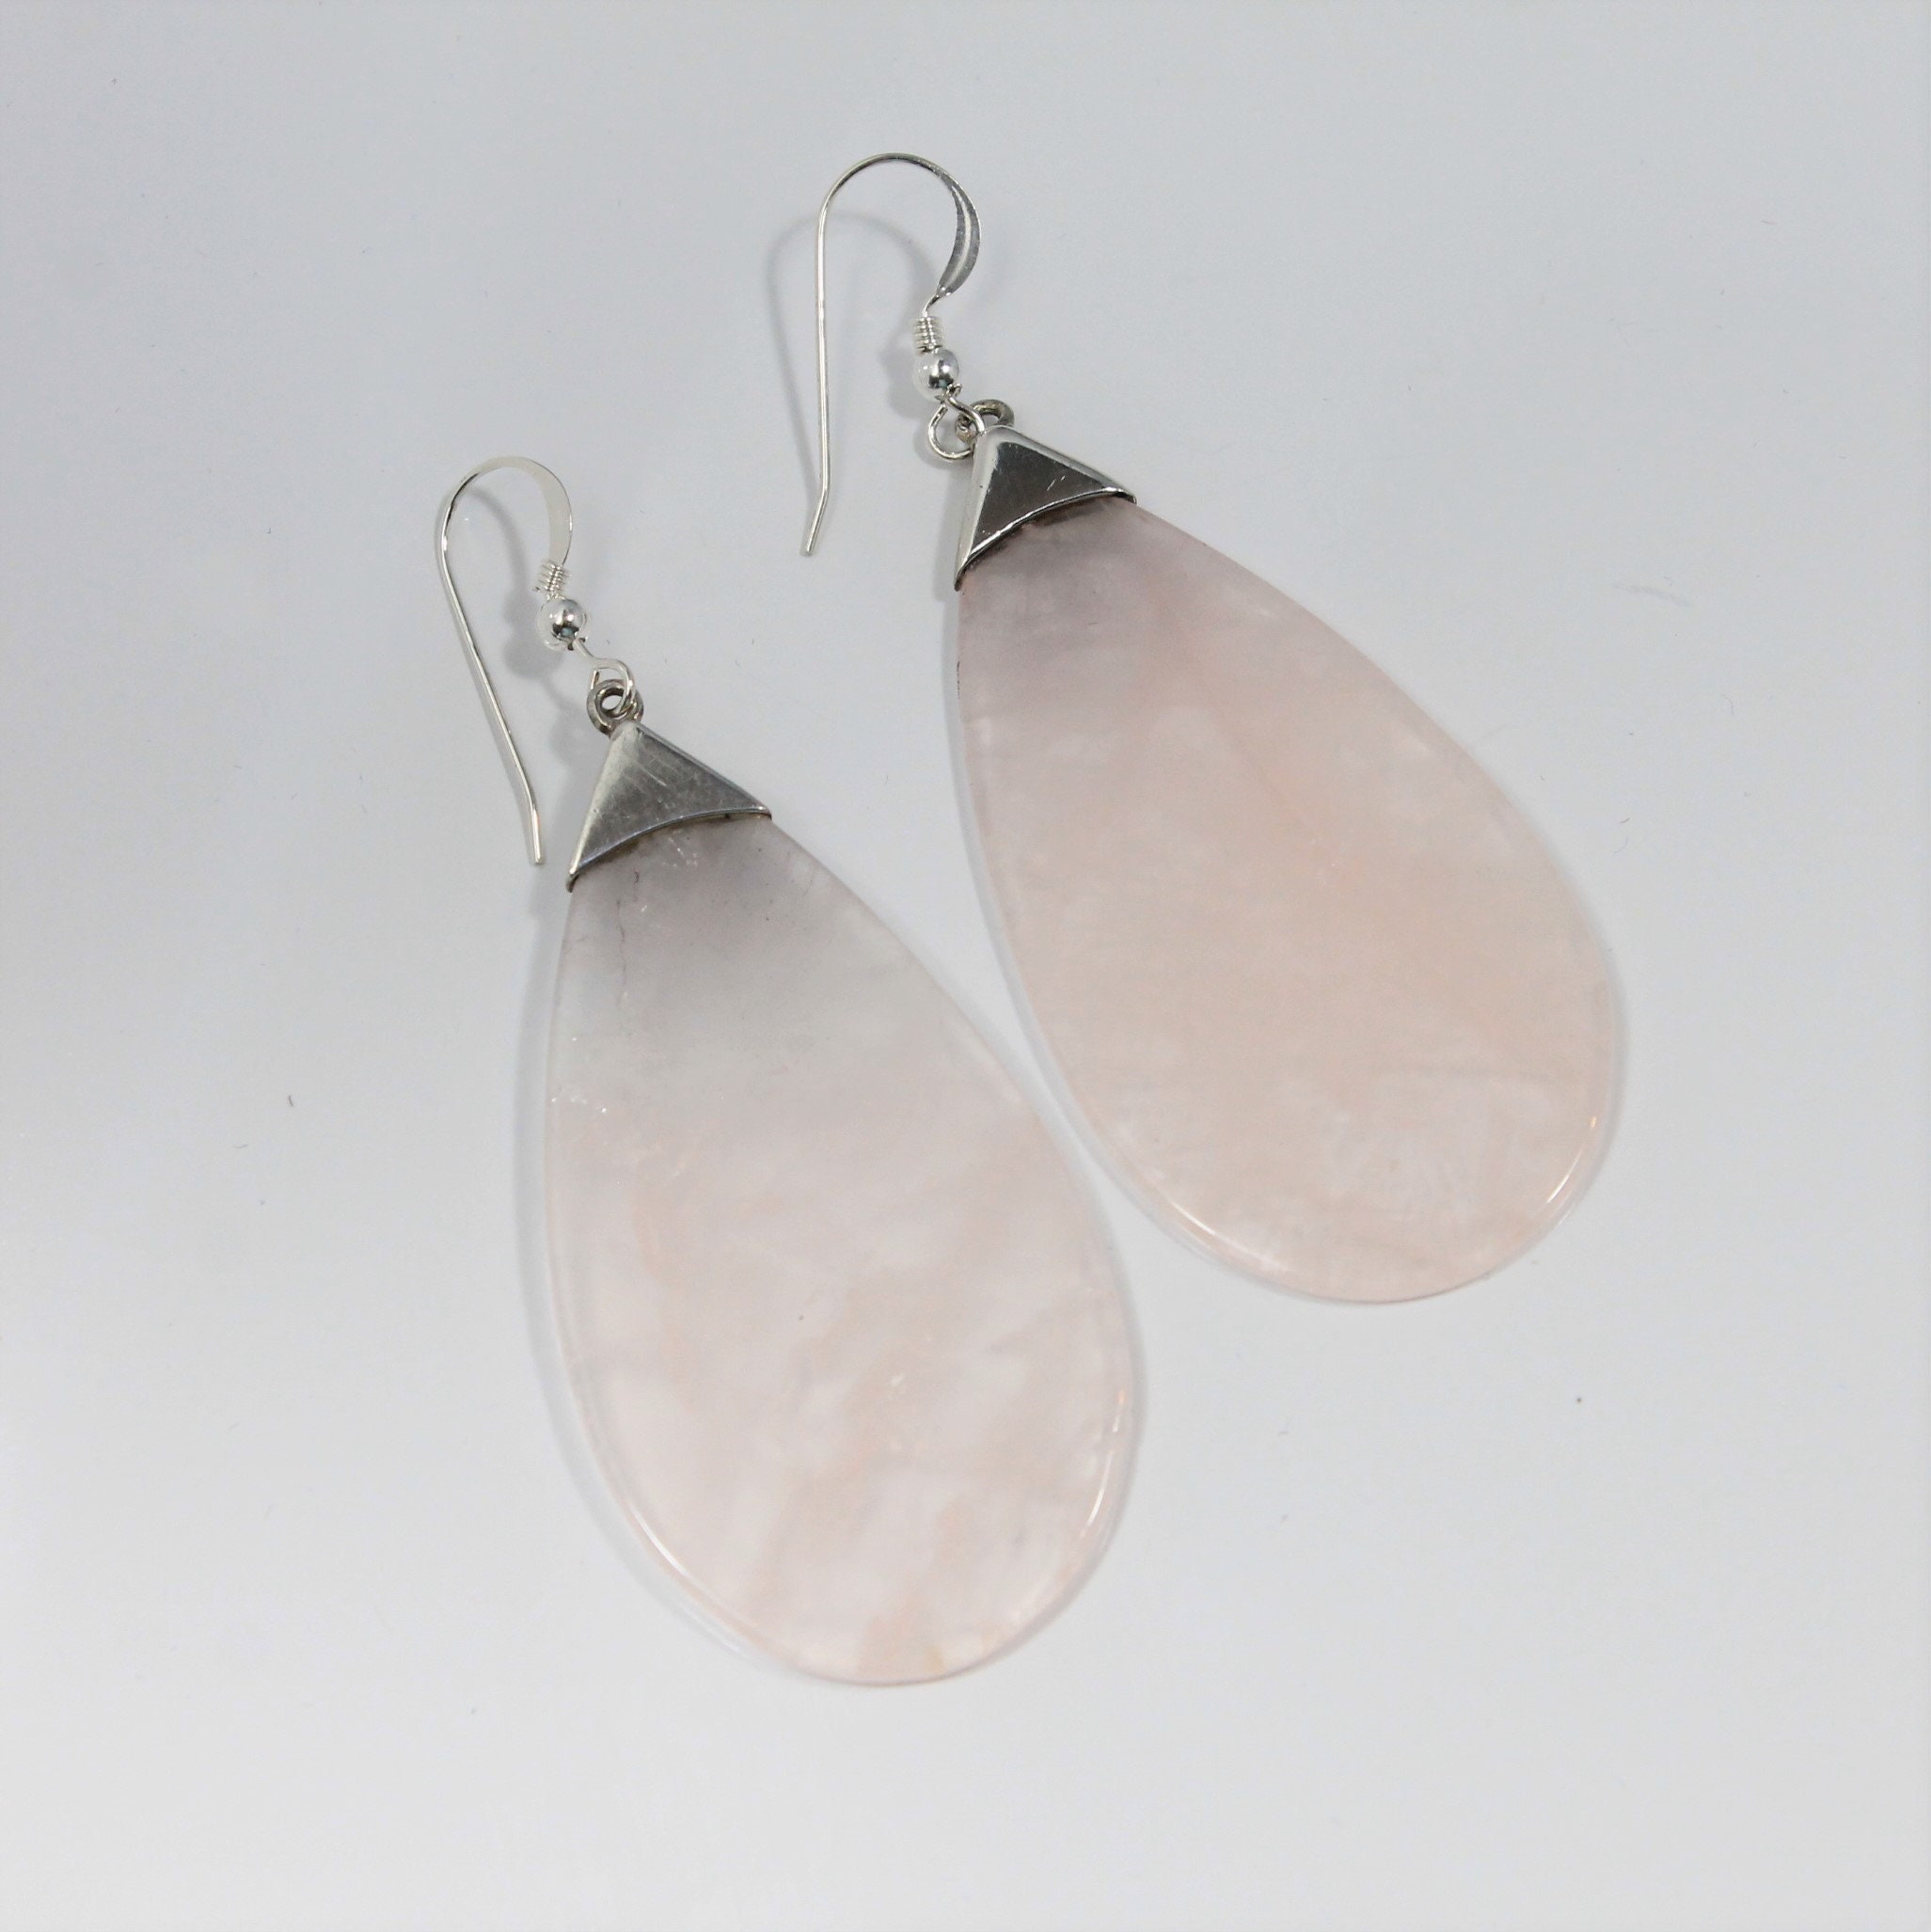 PAIR Large silver plated Rose Quartz statement earrings